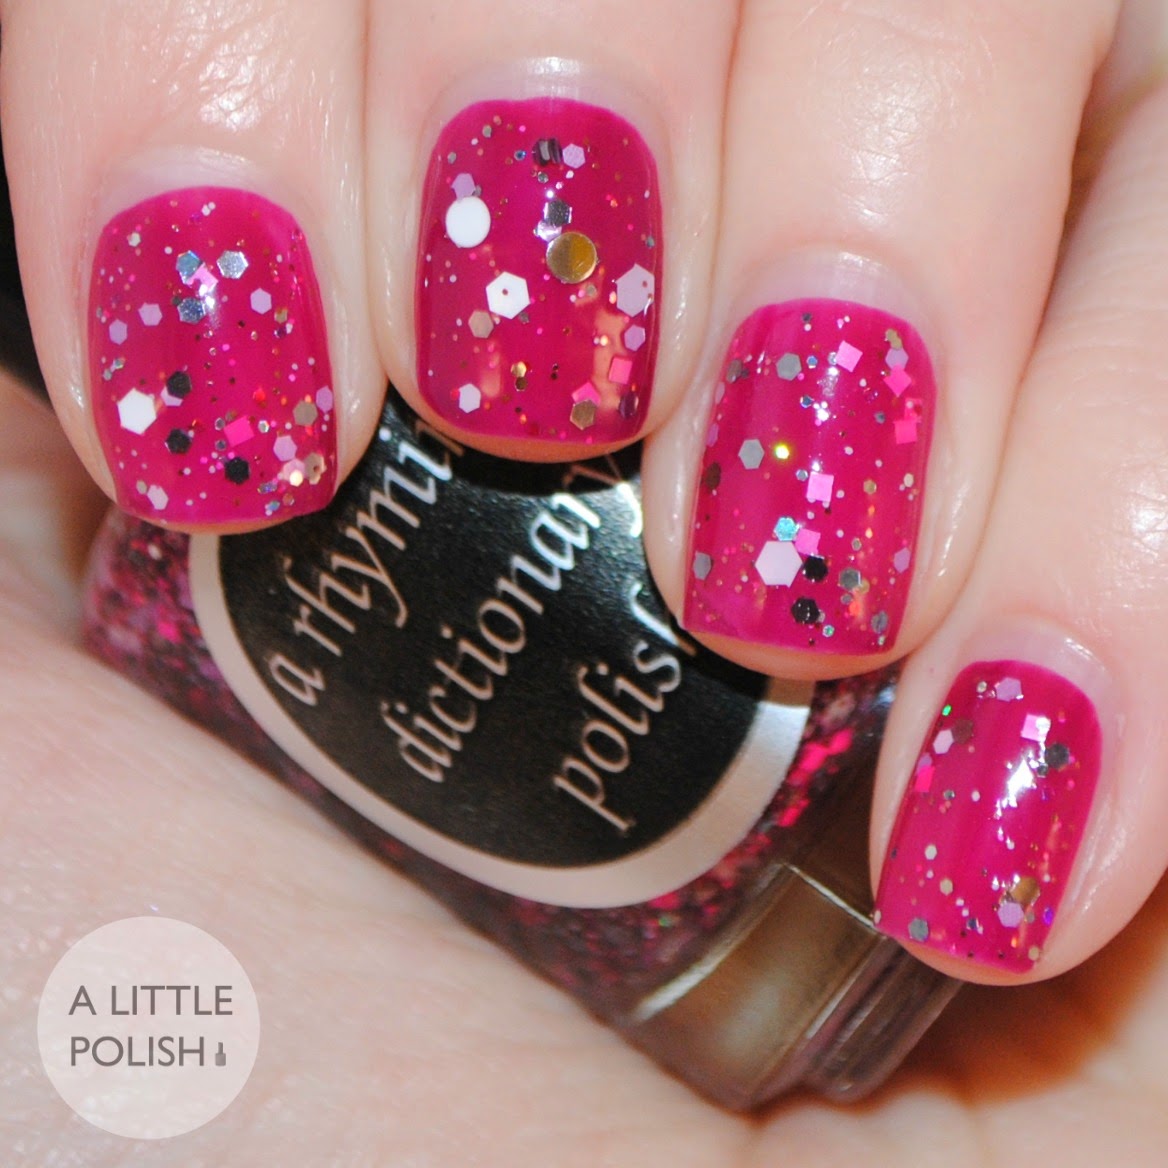 A Little Polish: A Rhyming Dictionary Polish - Swatches & Review